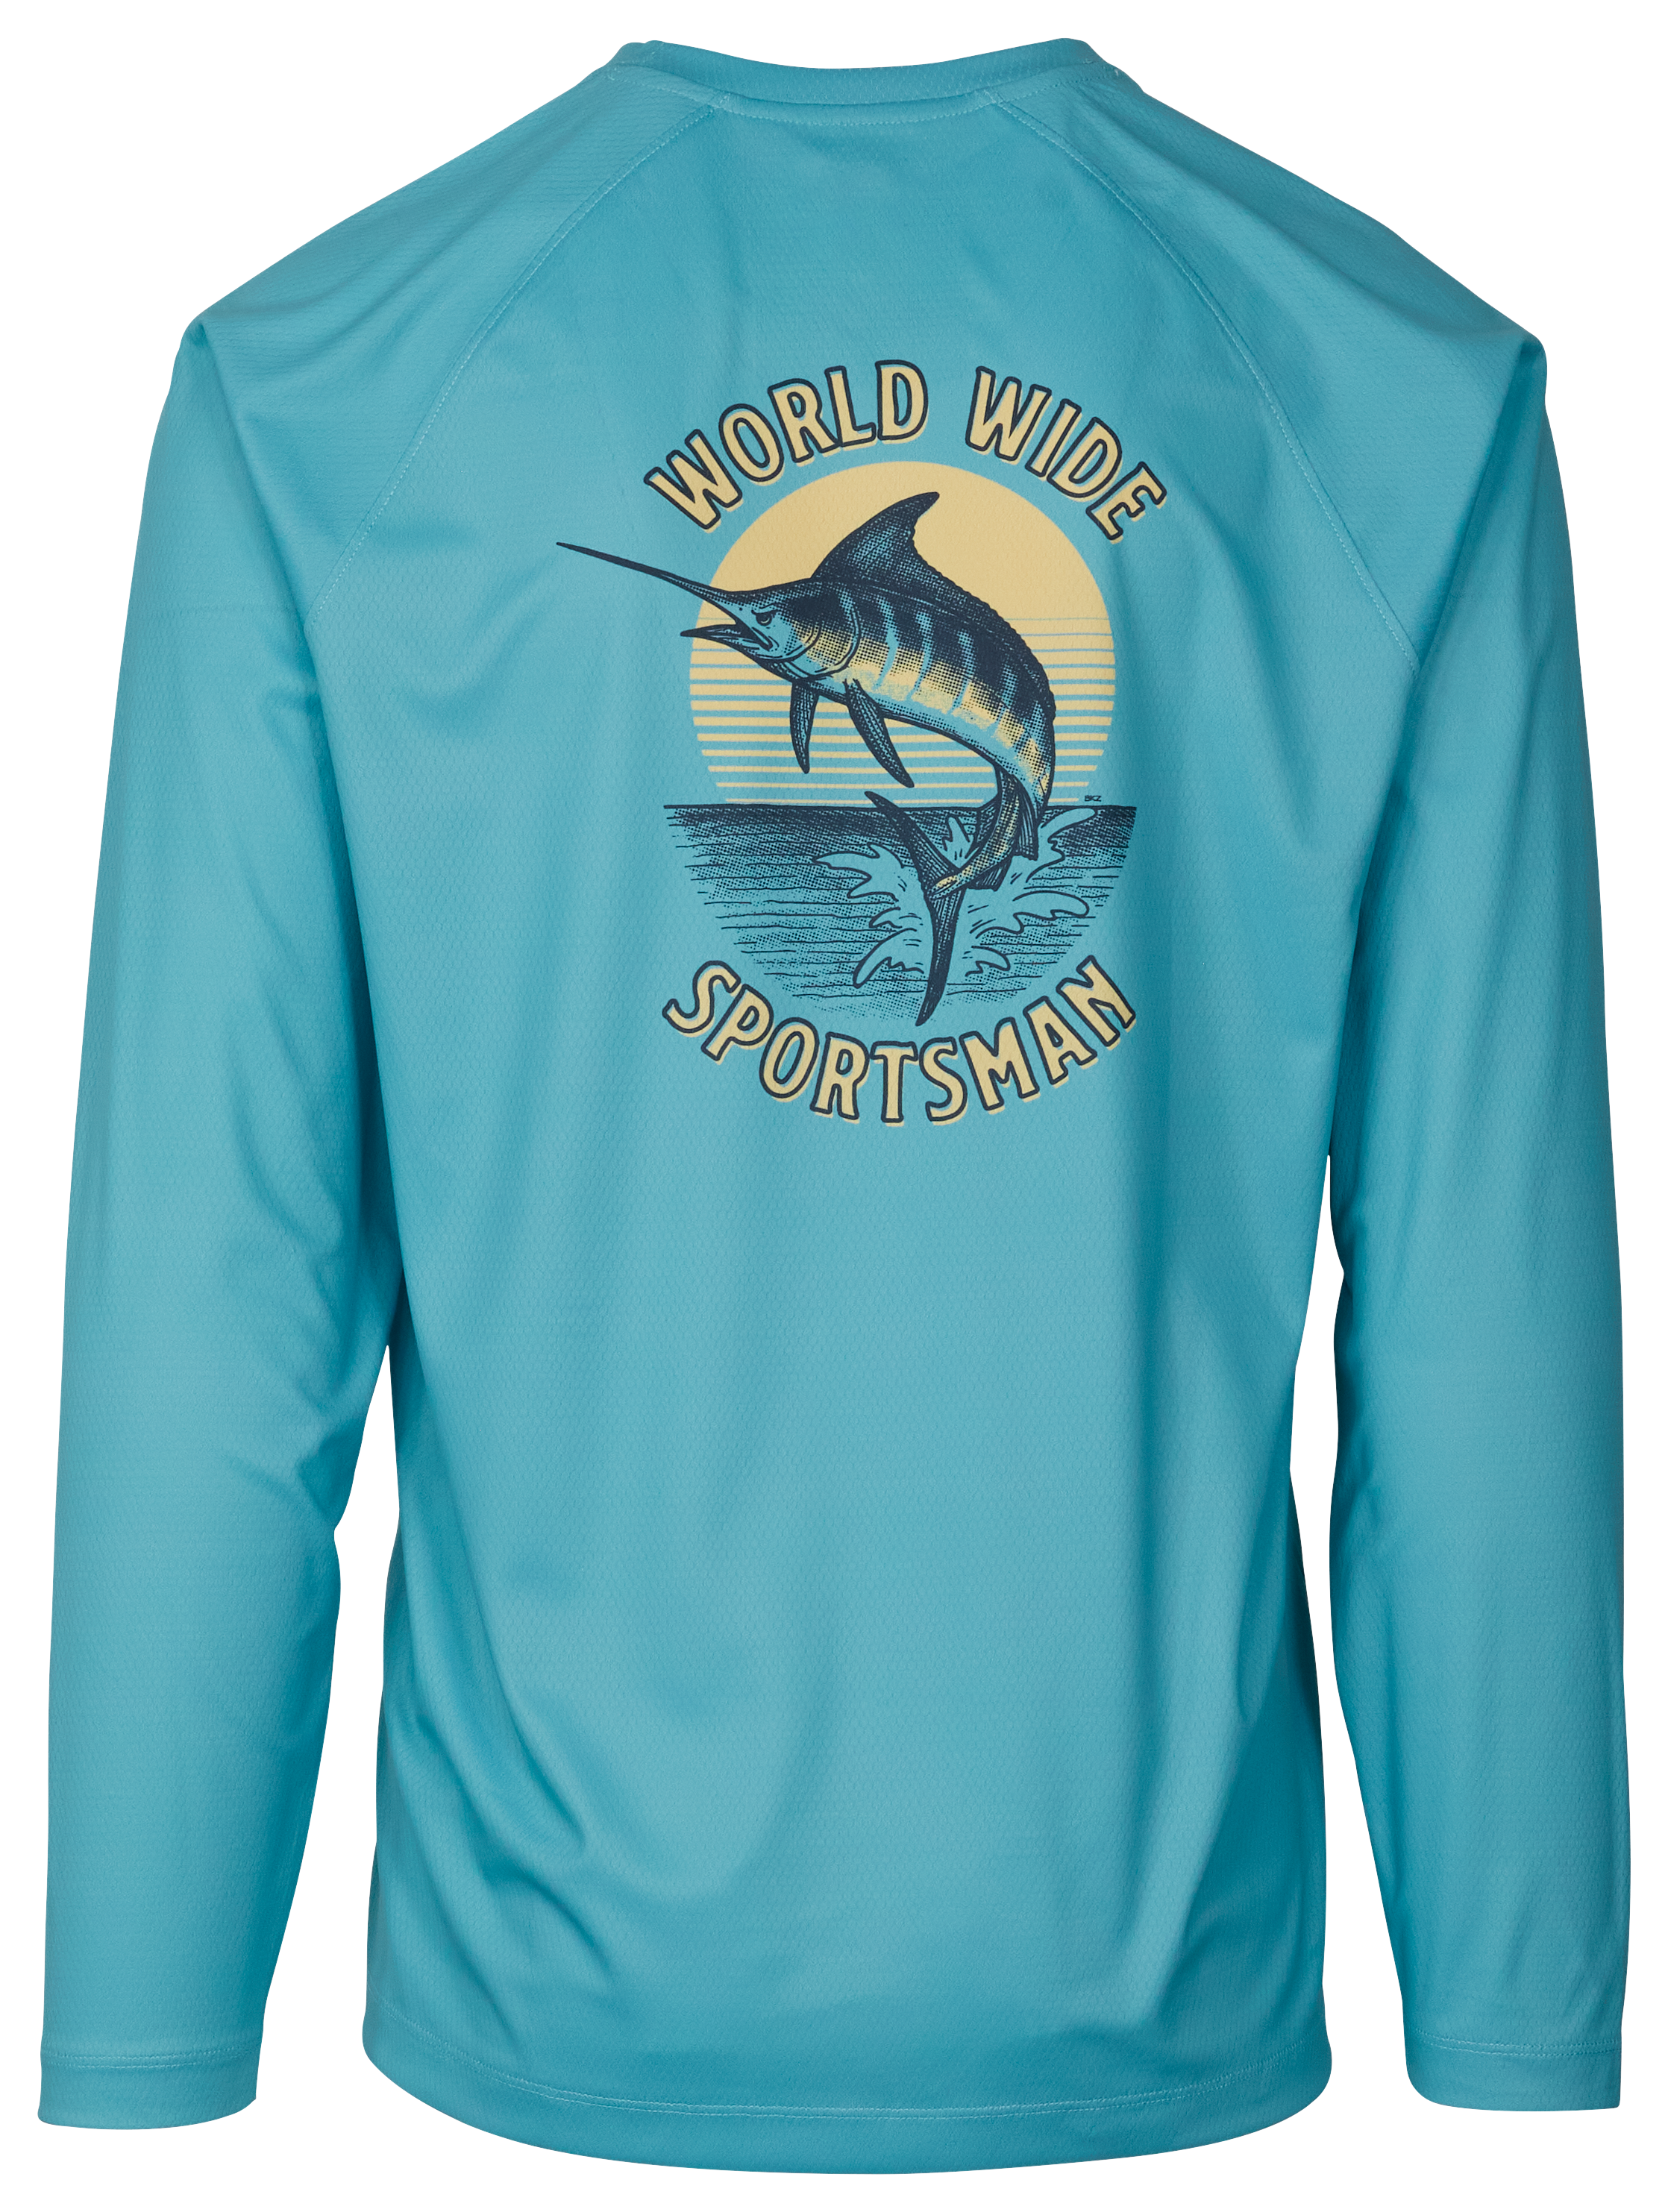 World Wide Sportsman Fishing Lines Sublimated Graphic Long-Sleeve T-Shirt for Men - Reef Waters - M